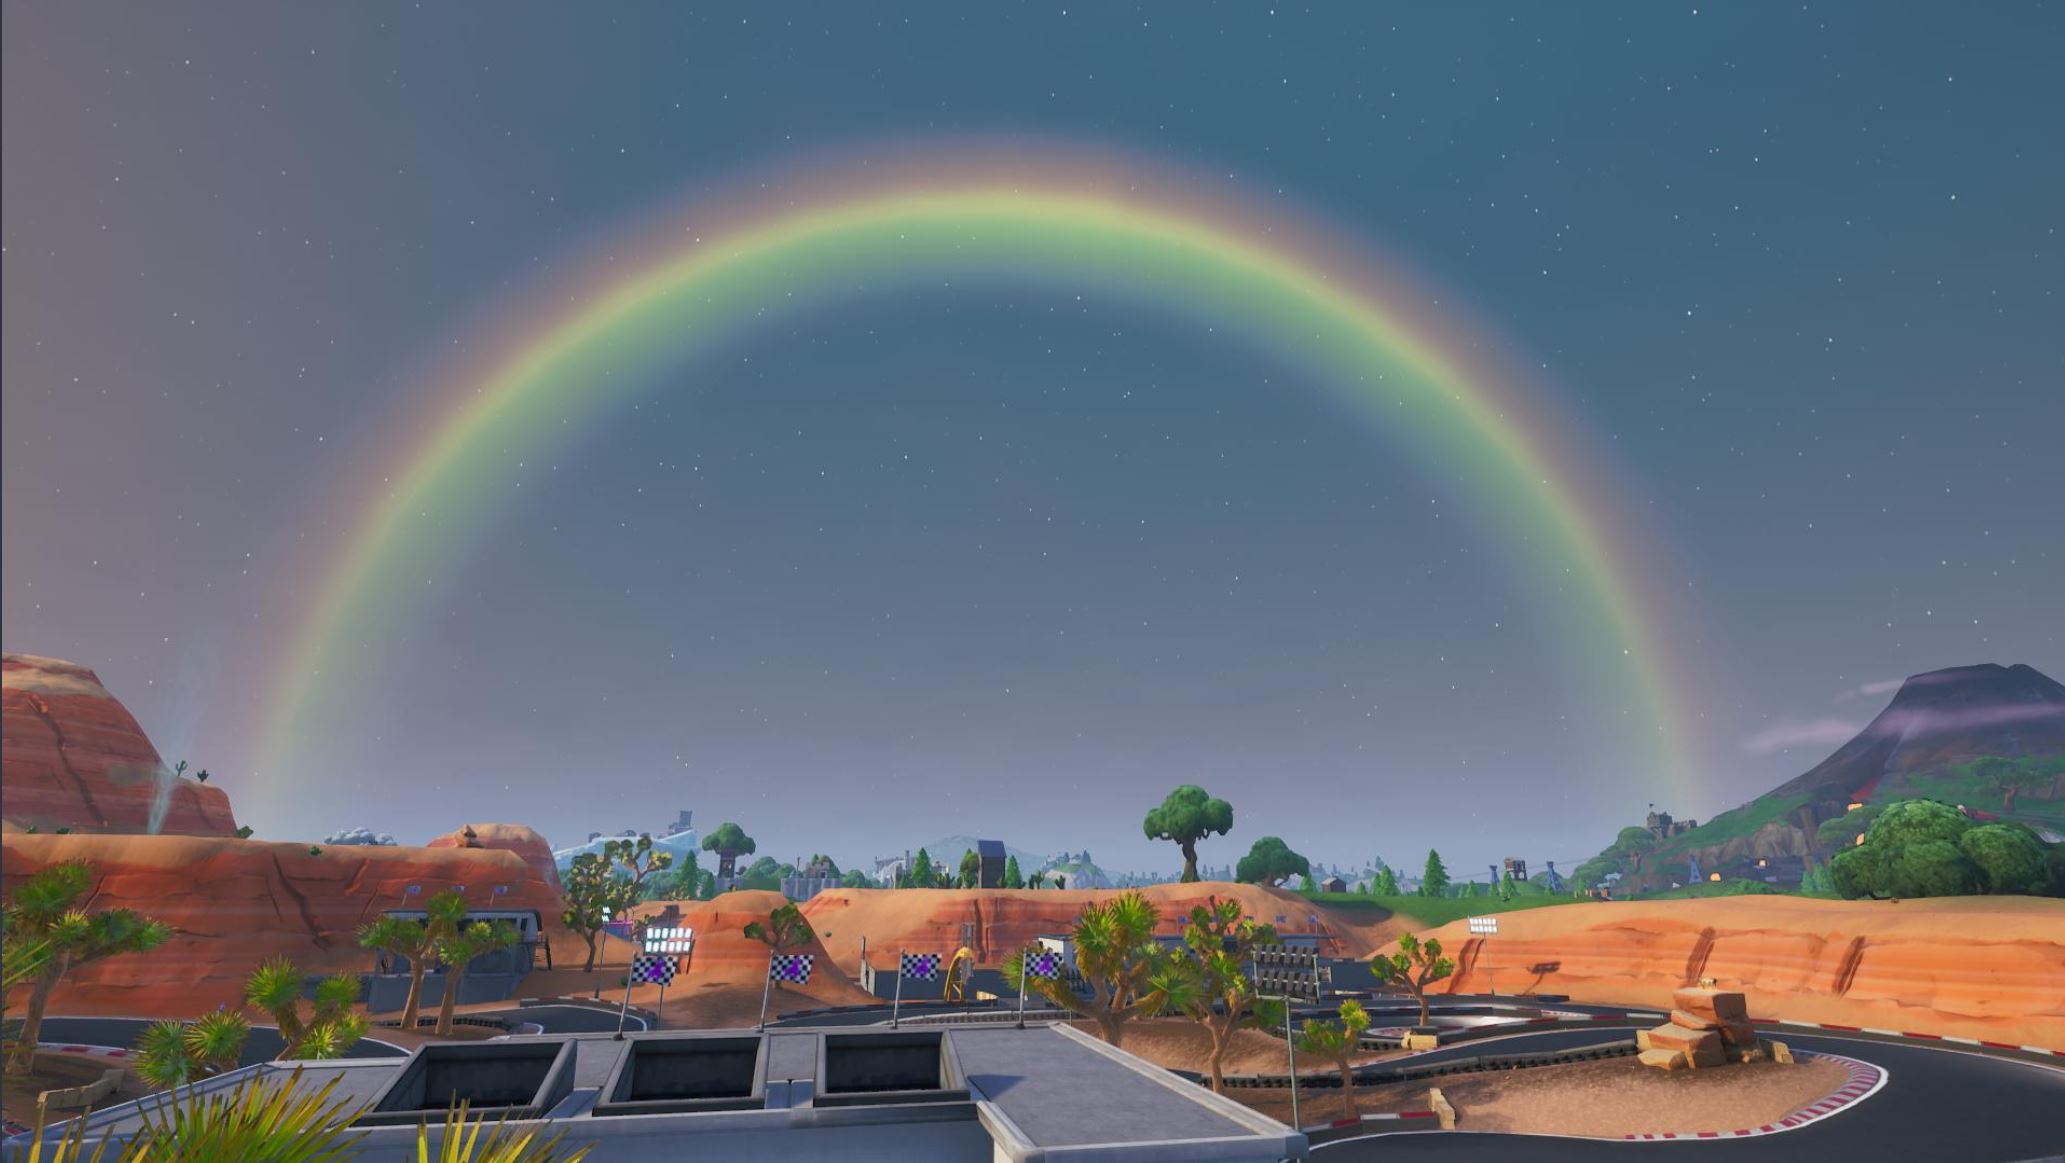 Fortnite Marks St Patrick 2019 With A Green Green Rainbow Clover - fortnite today runs a microsite for the irish national holiday st patrick s day he is currently in his shop on 17 3 2019 so sgt green clover